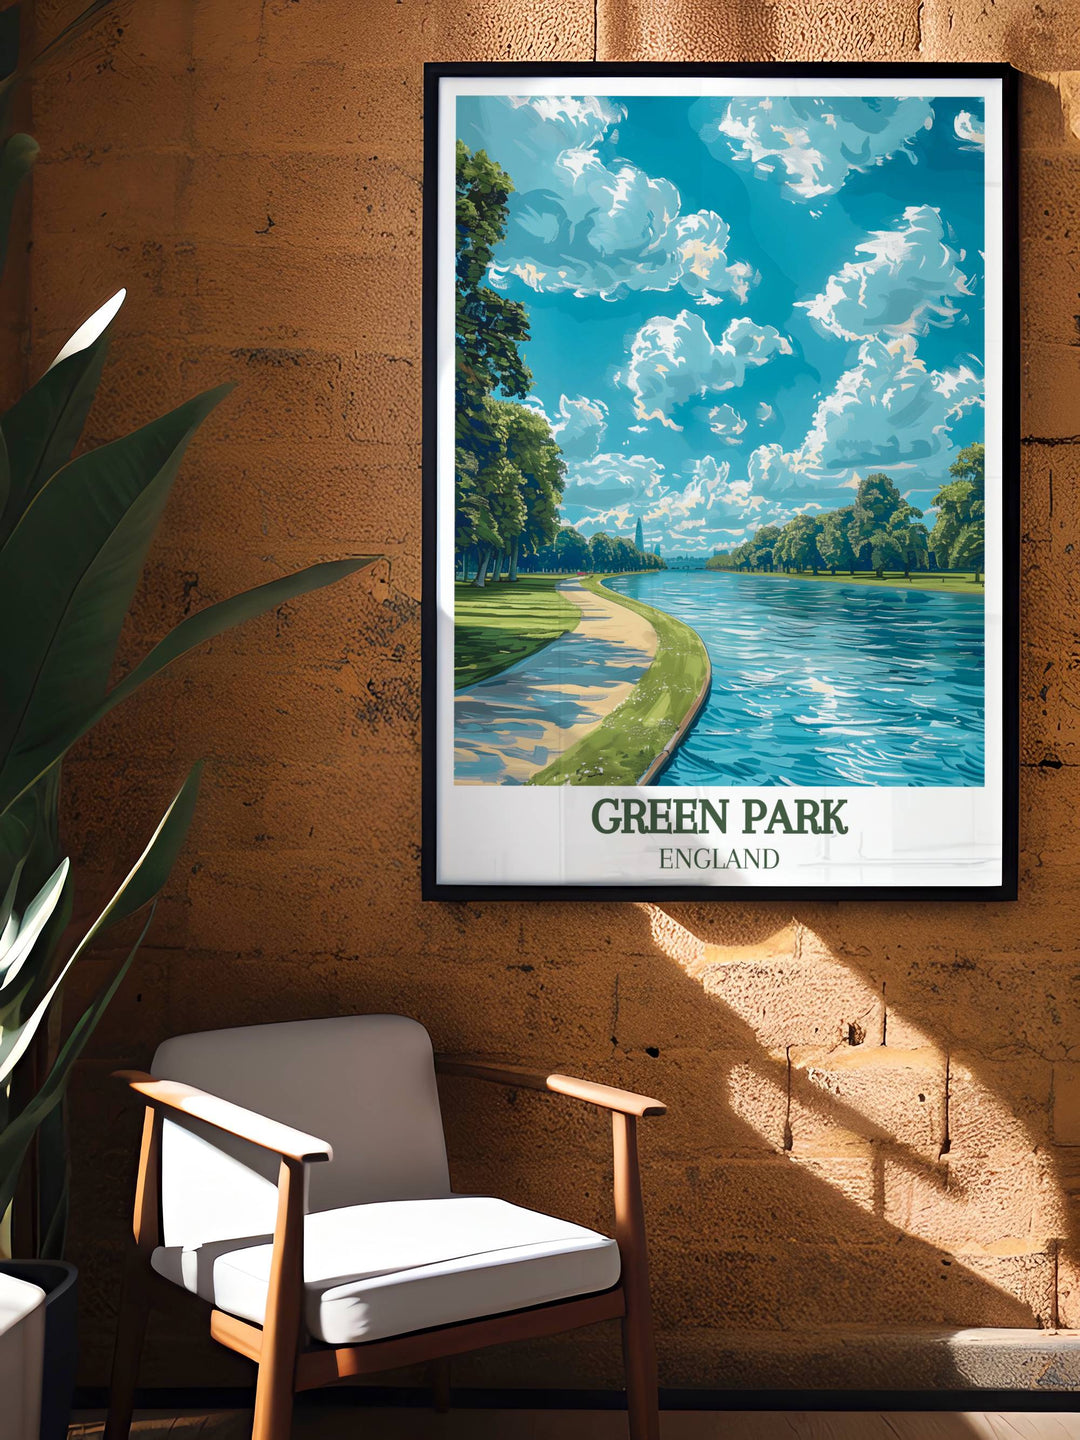 Captivating poster of Green Park London featuring the Princess of Wales Memorial Walk, showcasing the tranquil paths and lush greenery, ideal for enhancing any living space with elegant London wall art.